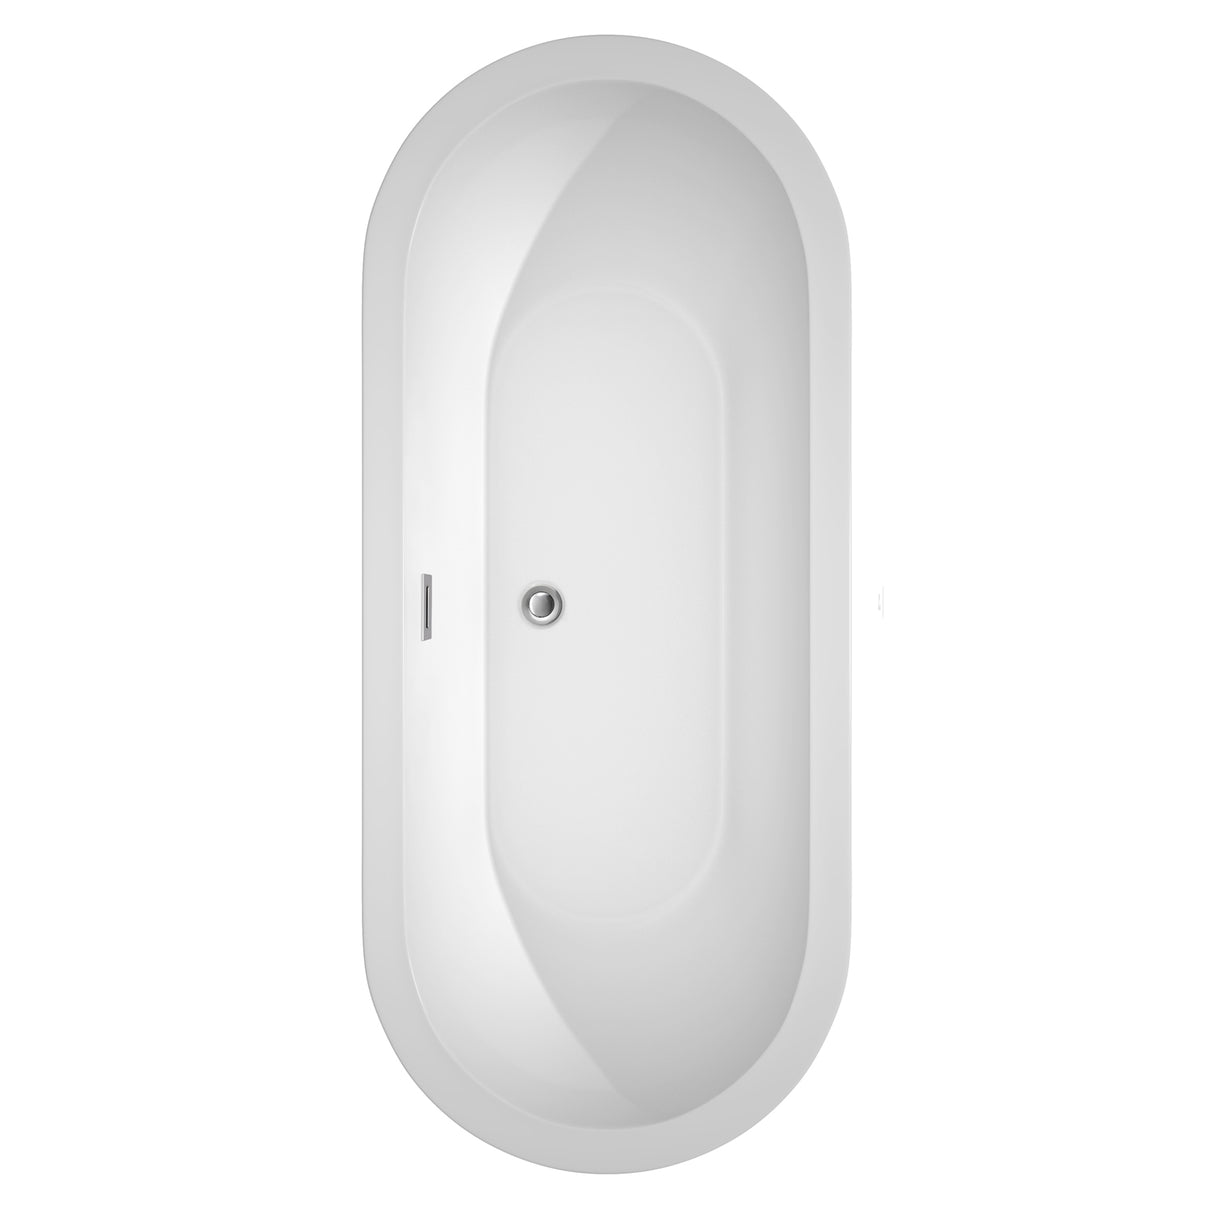 Soho 72 Inch Freestanding Bathtub in White with Floor Mounted Faucet Drain and Overflow Trim in Polished Chrome